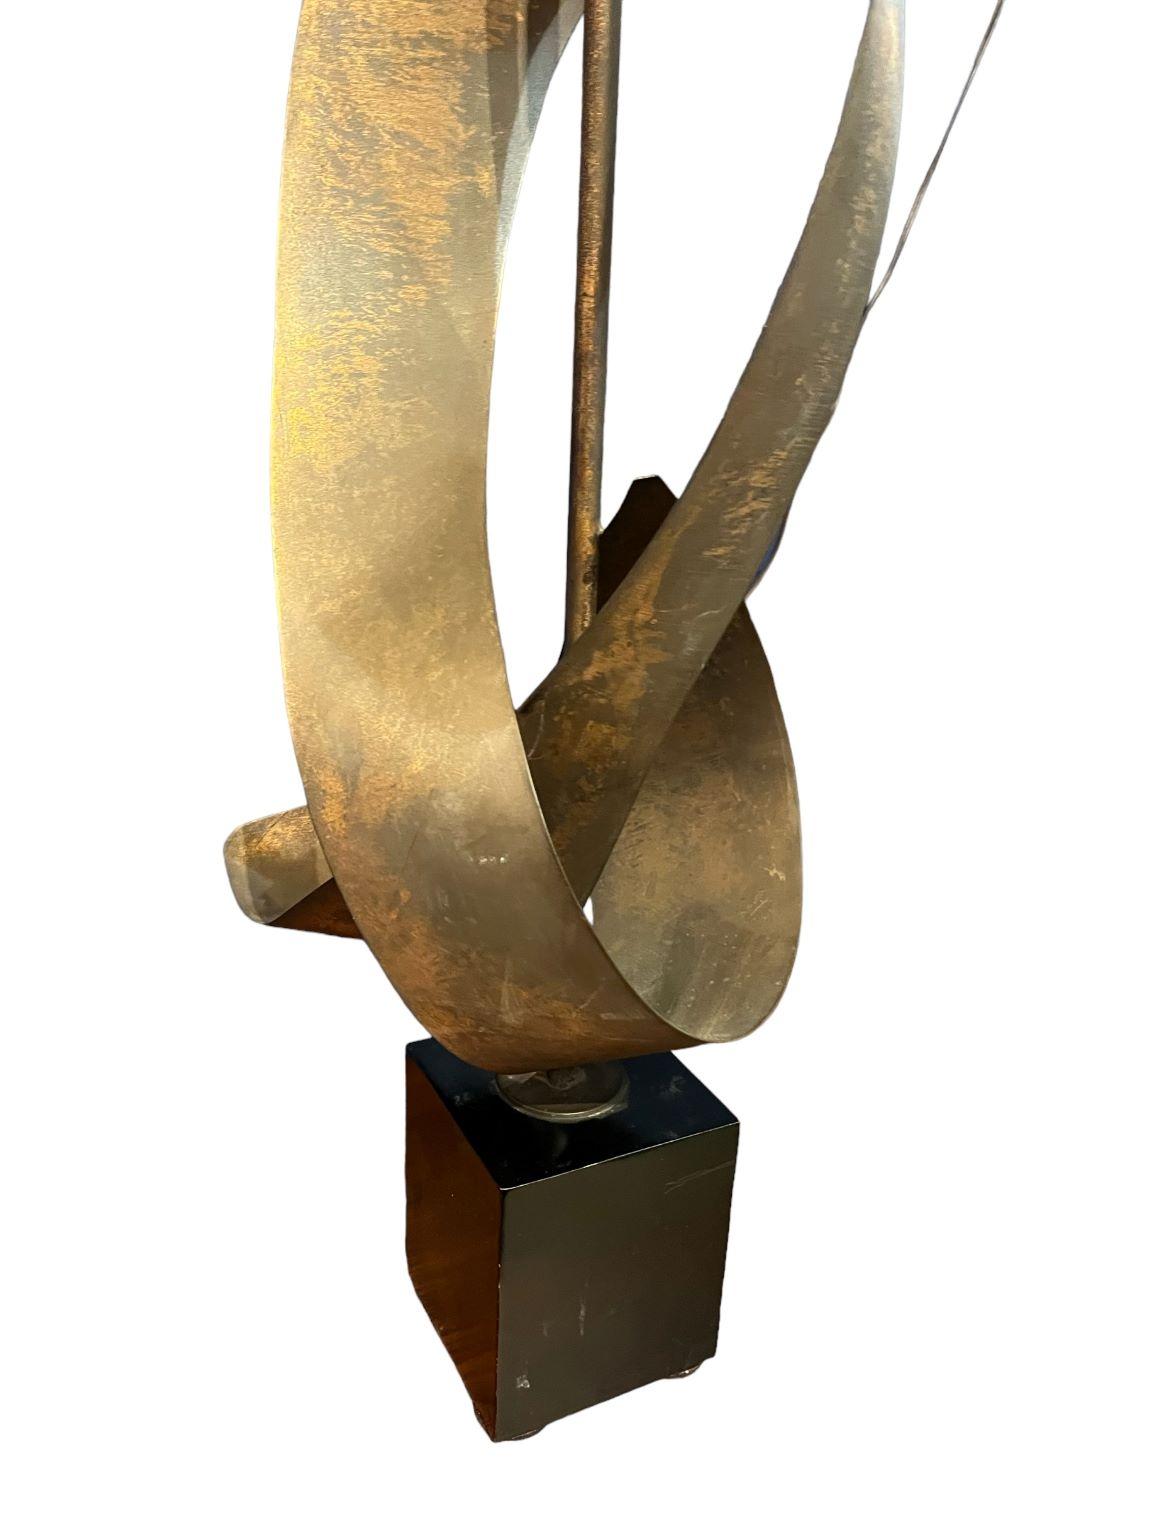 Brutalist lamp by Richard Barr for the Laurel Lamp Company, Newark, N.J. Abstract ribbon shape on black enamel painted square base. Original lamp and shade. Wonderful modern sculptural art, will add significant presence to any setting. 18 inches